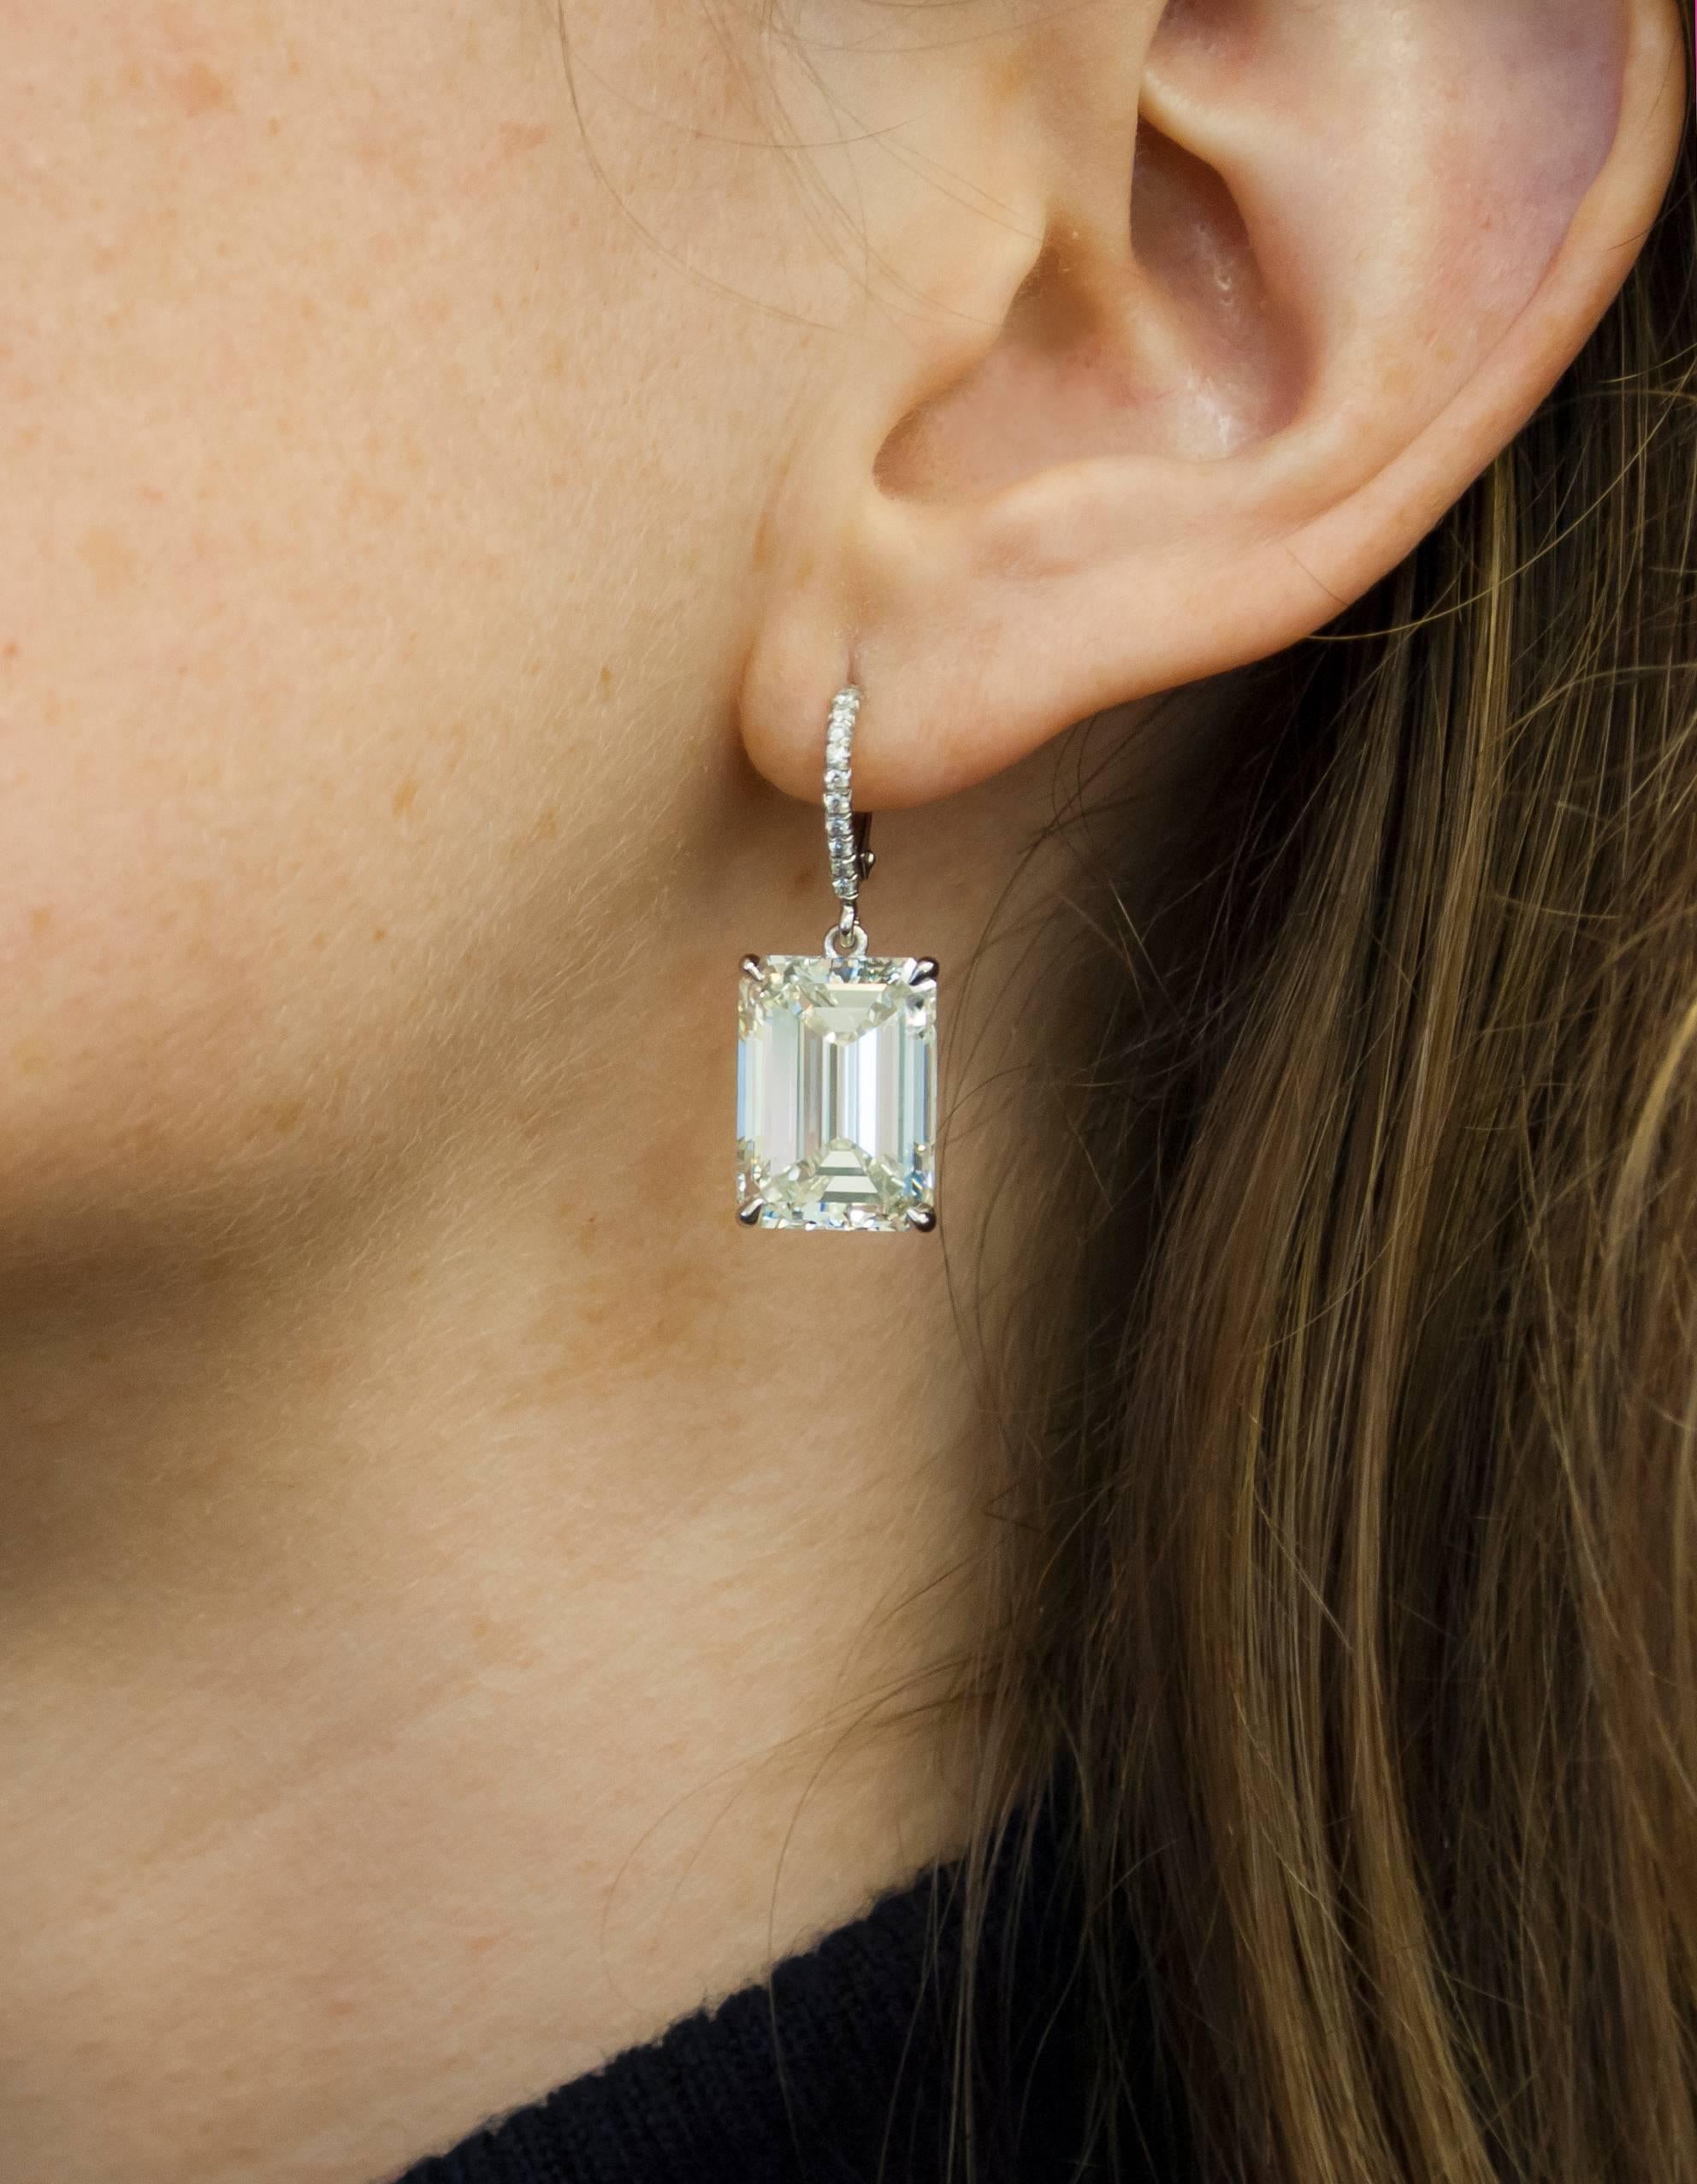 This amazing pair of emerald cut lever-back earrings by J. Birnbach features emerald cut diamonds weighing 10.03 carats and 10.08 carats each. They are set on a platinum mounting with pave diamonds down the wire. The two diamonds are certified by